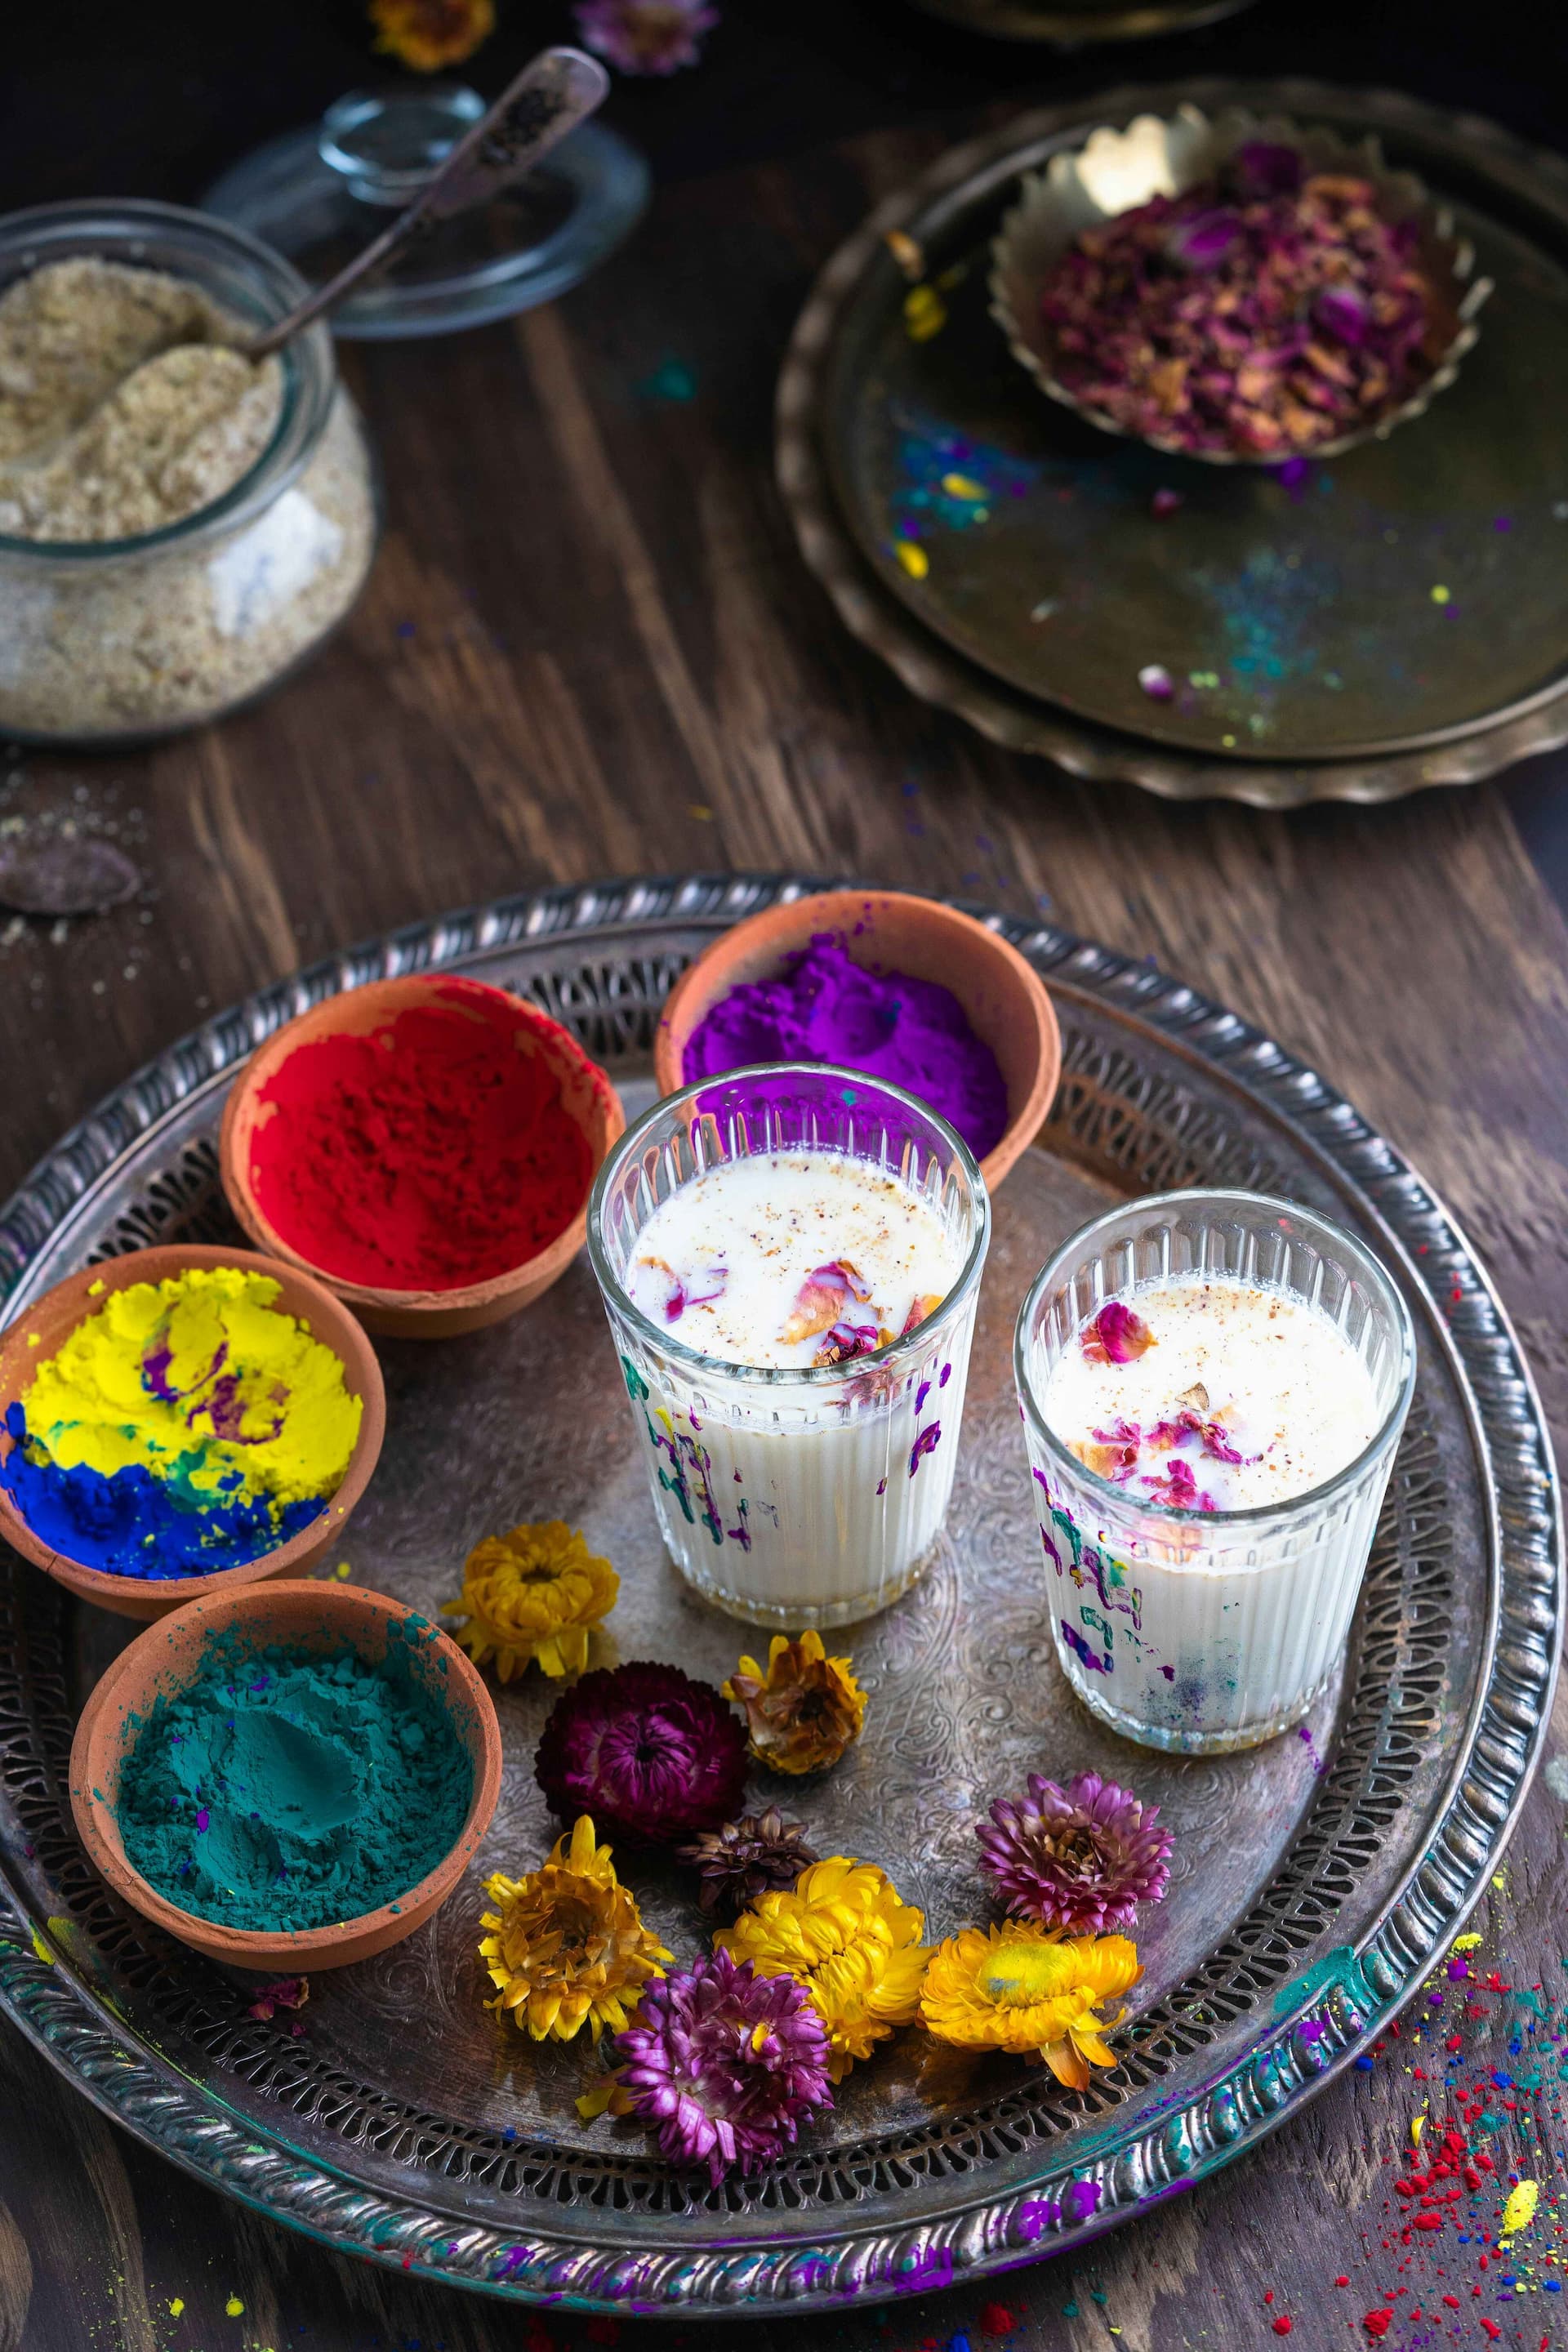 This Thandai Powder Recipe Gives You The Perfect Drink Every Time